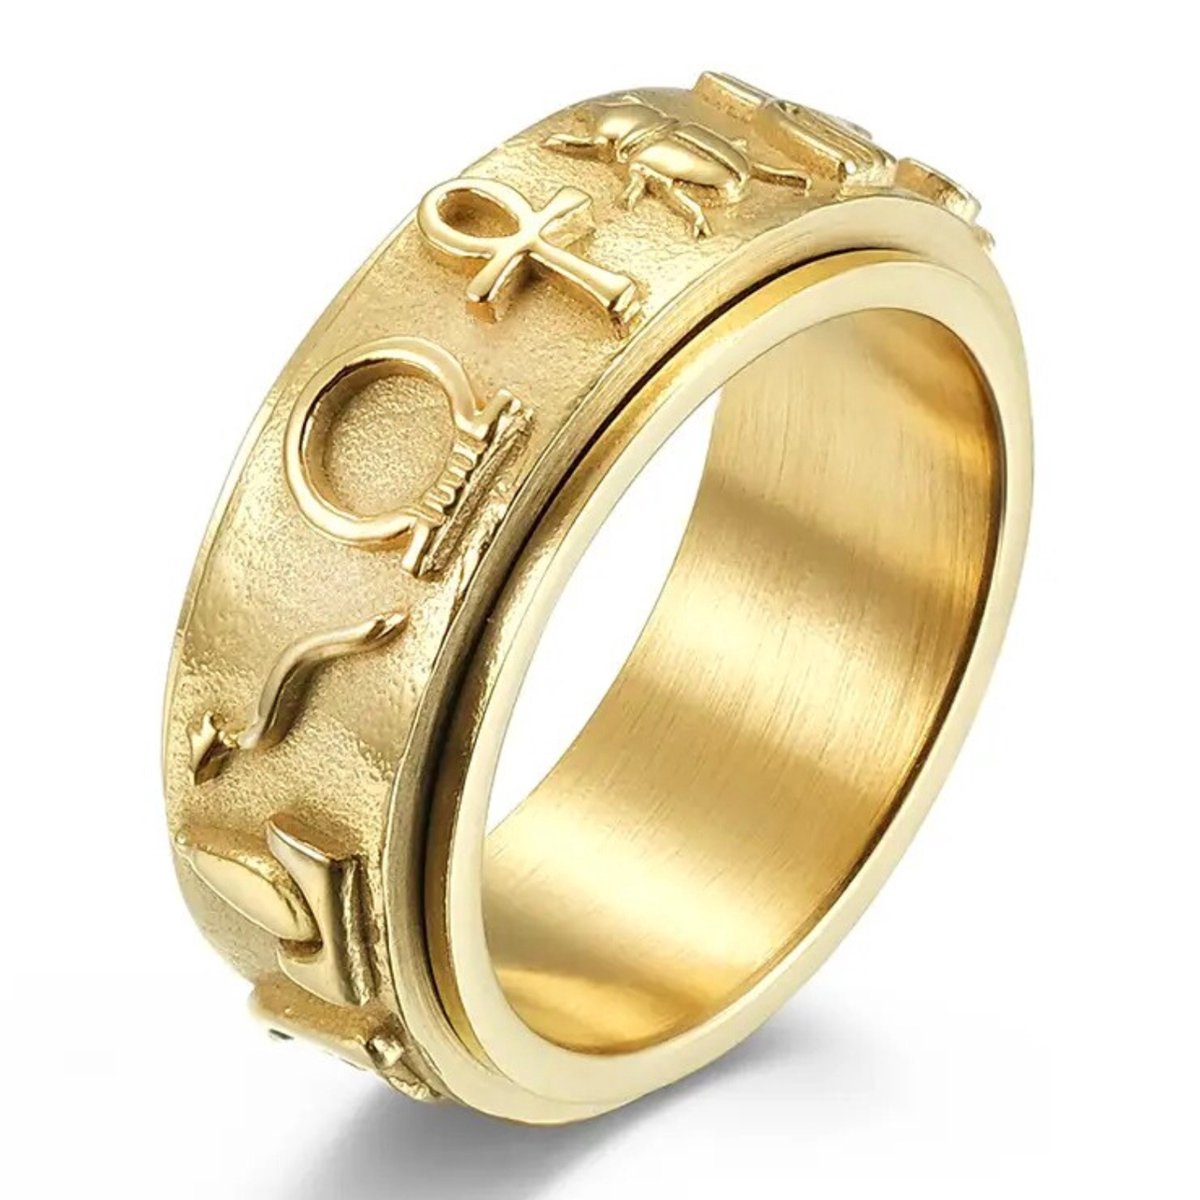 Anxiety Ring - (Egypte) - Stress Ring - Fidget Ring - Anxiety Ring For Finger - Draaibare Ring - Spinning Ring - Goud - (19.00 mm / maat 60)